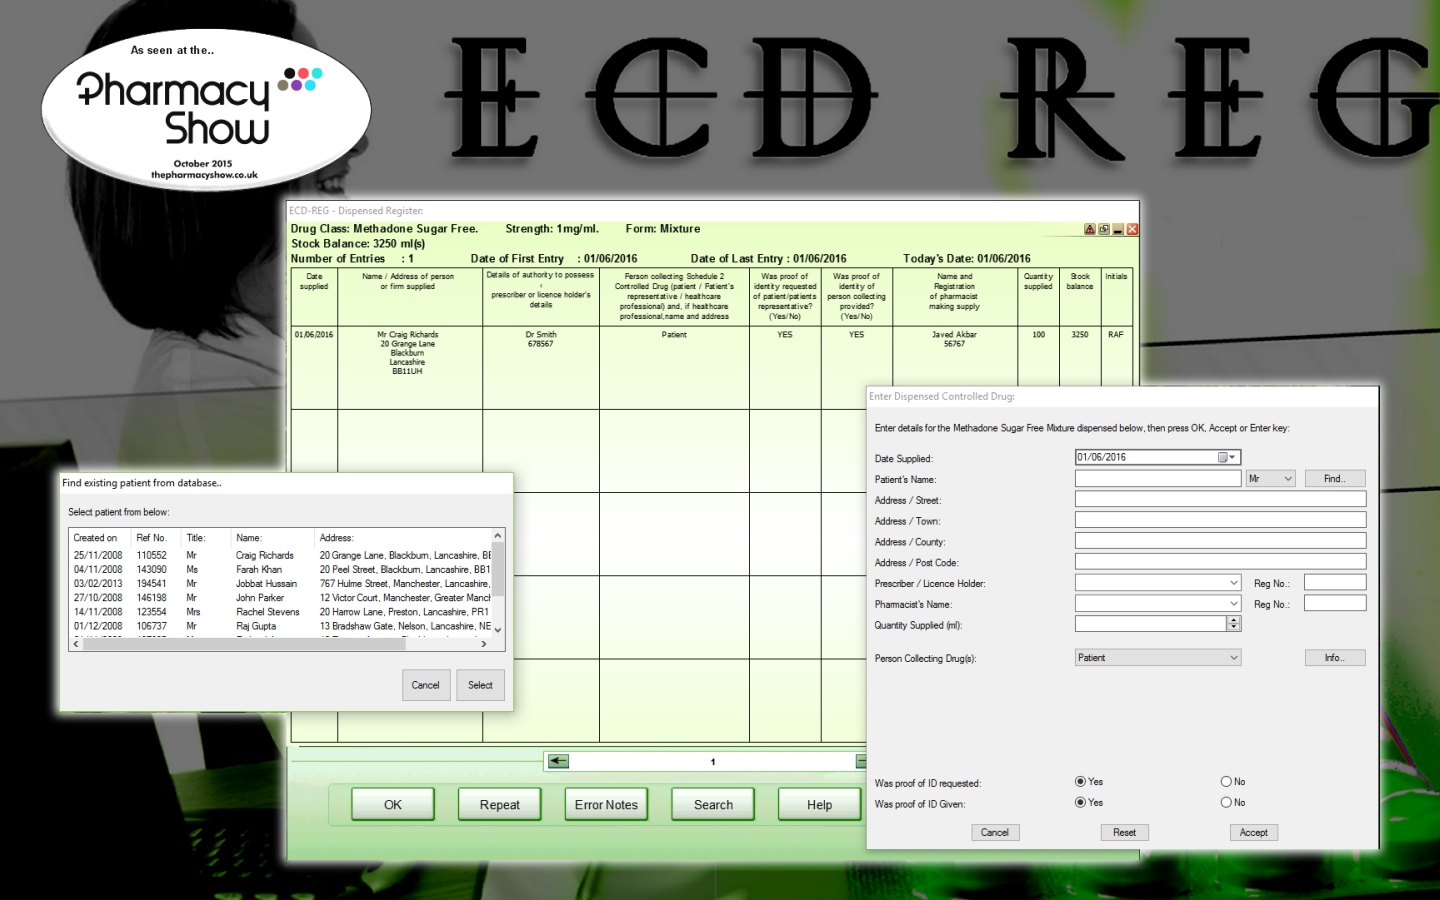 pharmacy ecdr software free trial download